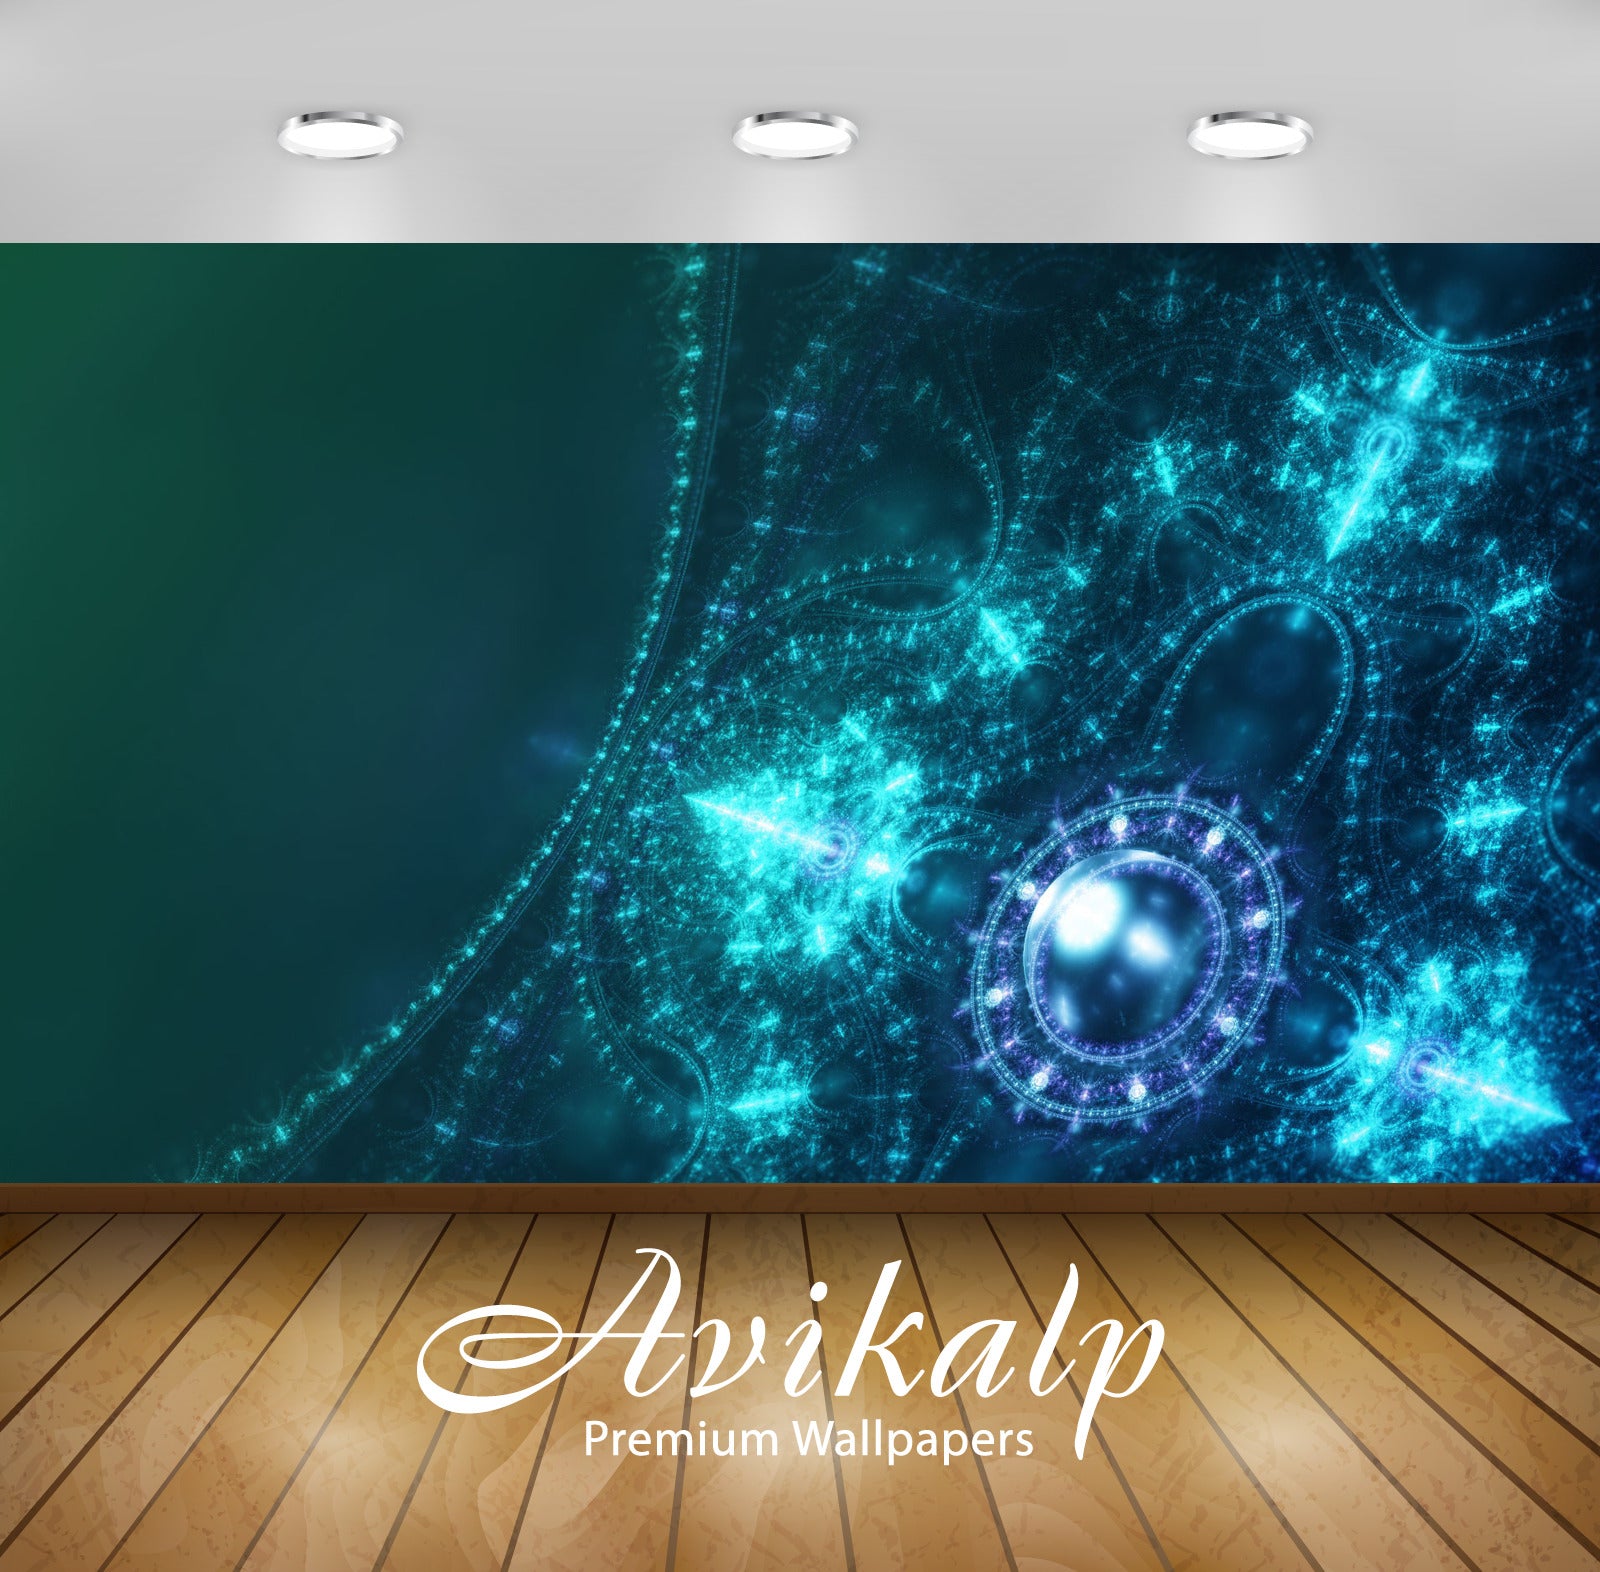 Avikalp Exclusive Awi4369 Fractal Glow Full HD Wallpapers for Living room, Hall, Kids Room, Kitchen,